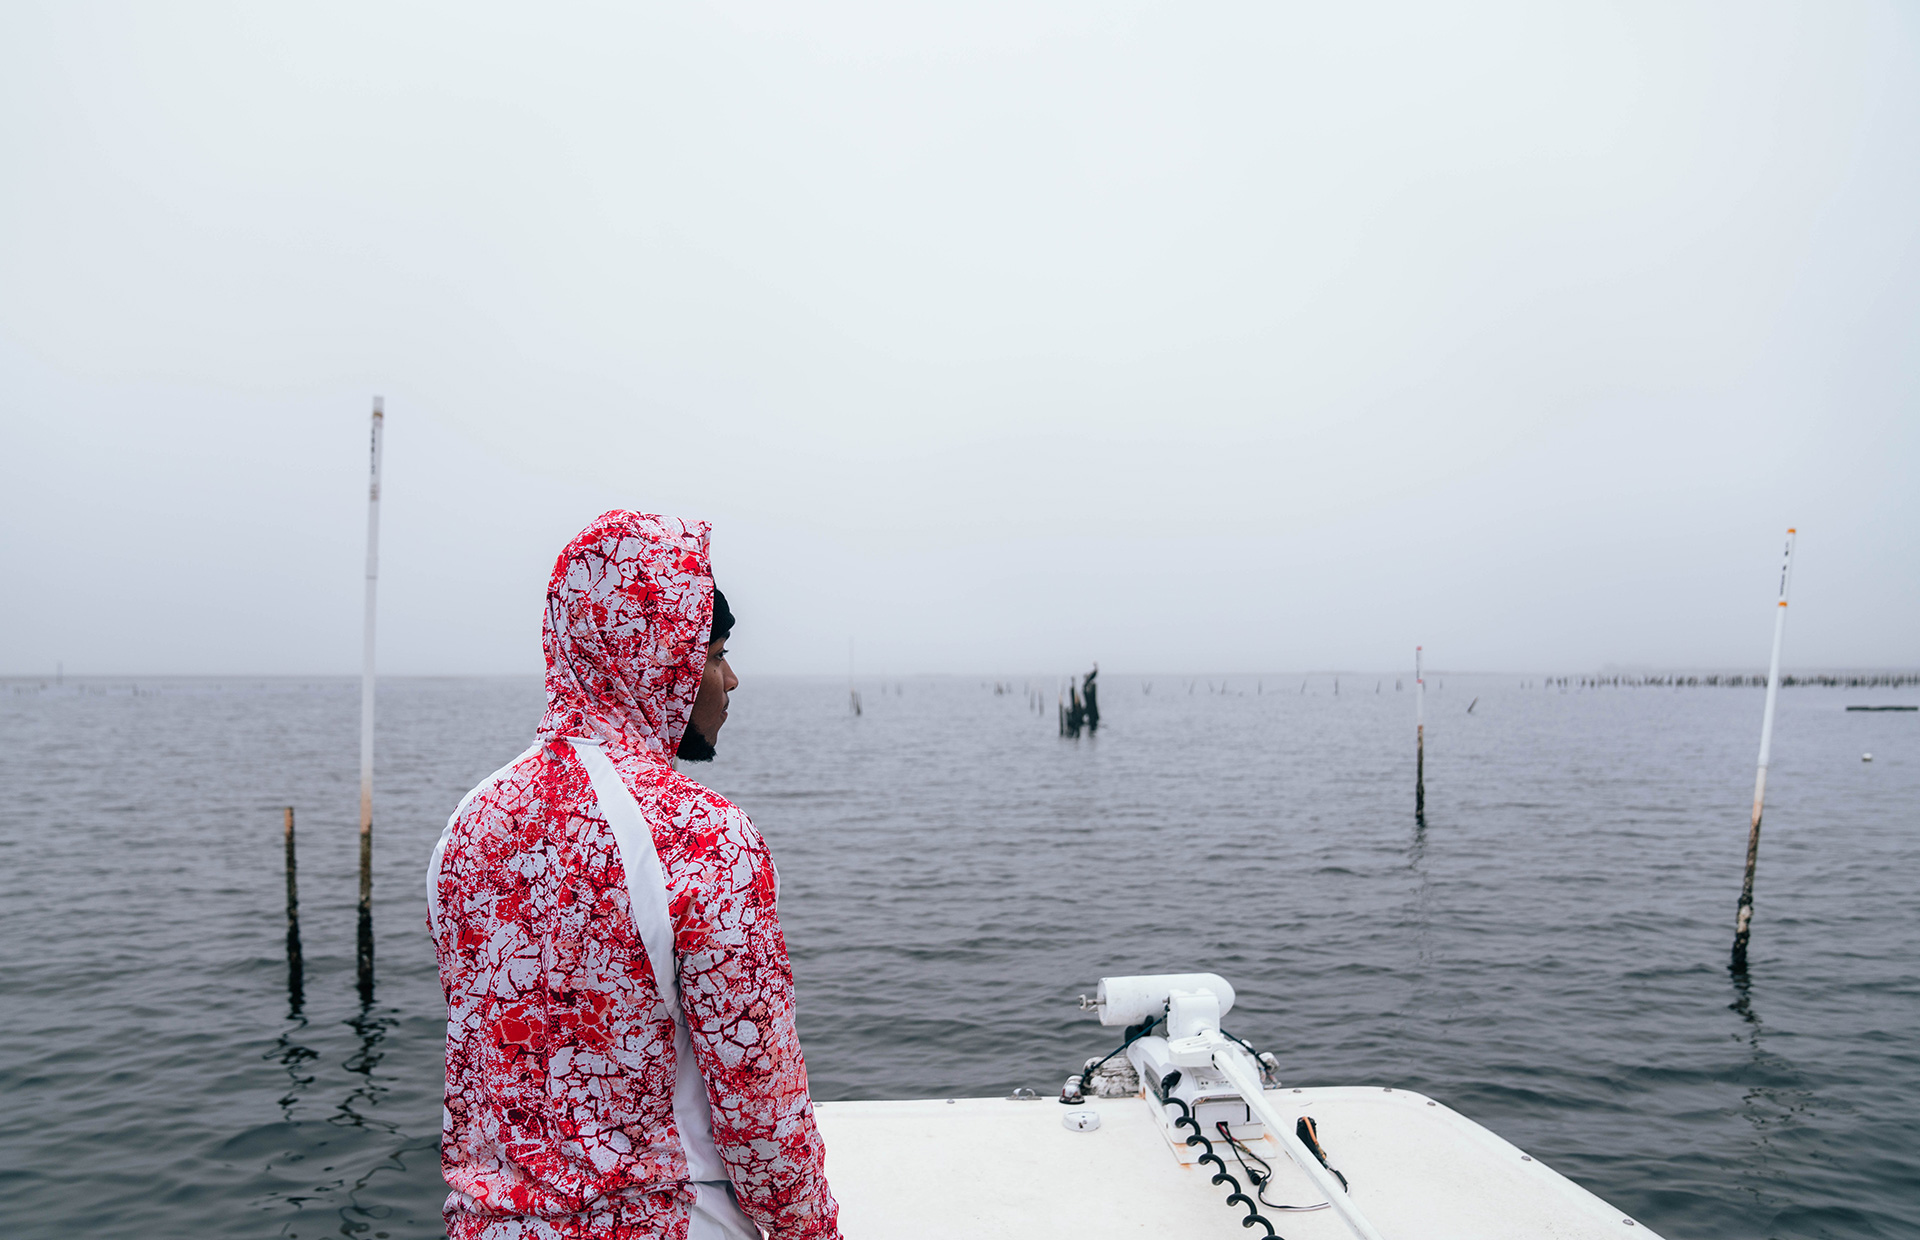 Adrian Morris surveys the oyster leases as the boat pulls up in the morning fog. After working with Jody’s crew, he is now working toward getting his own Spring Creek lease up and running.